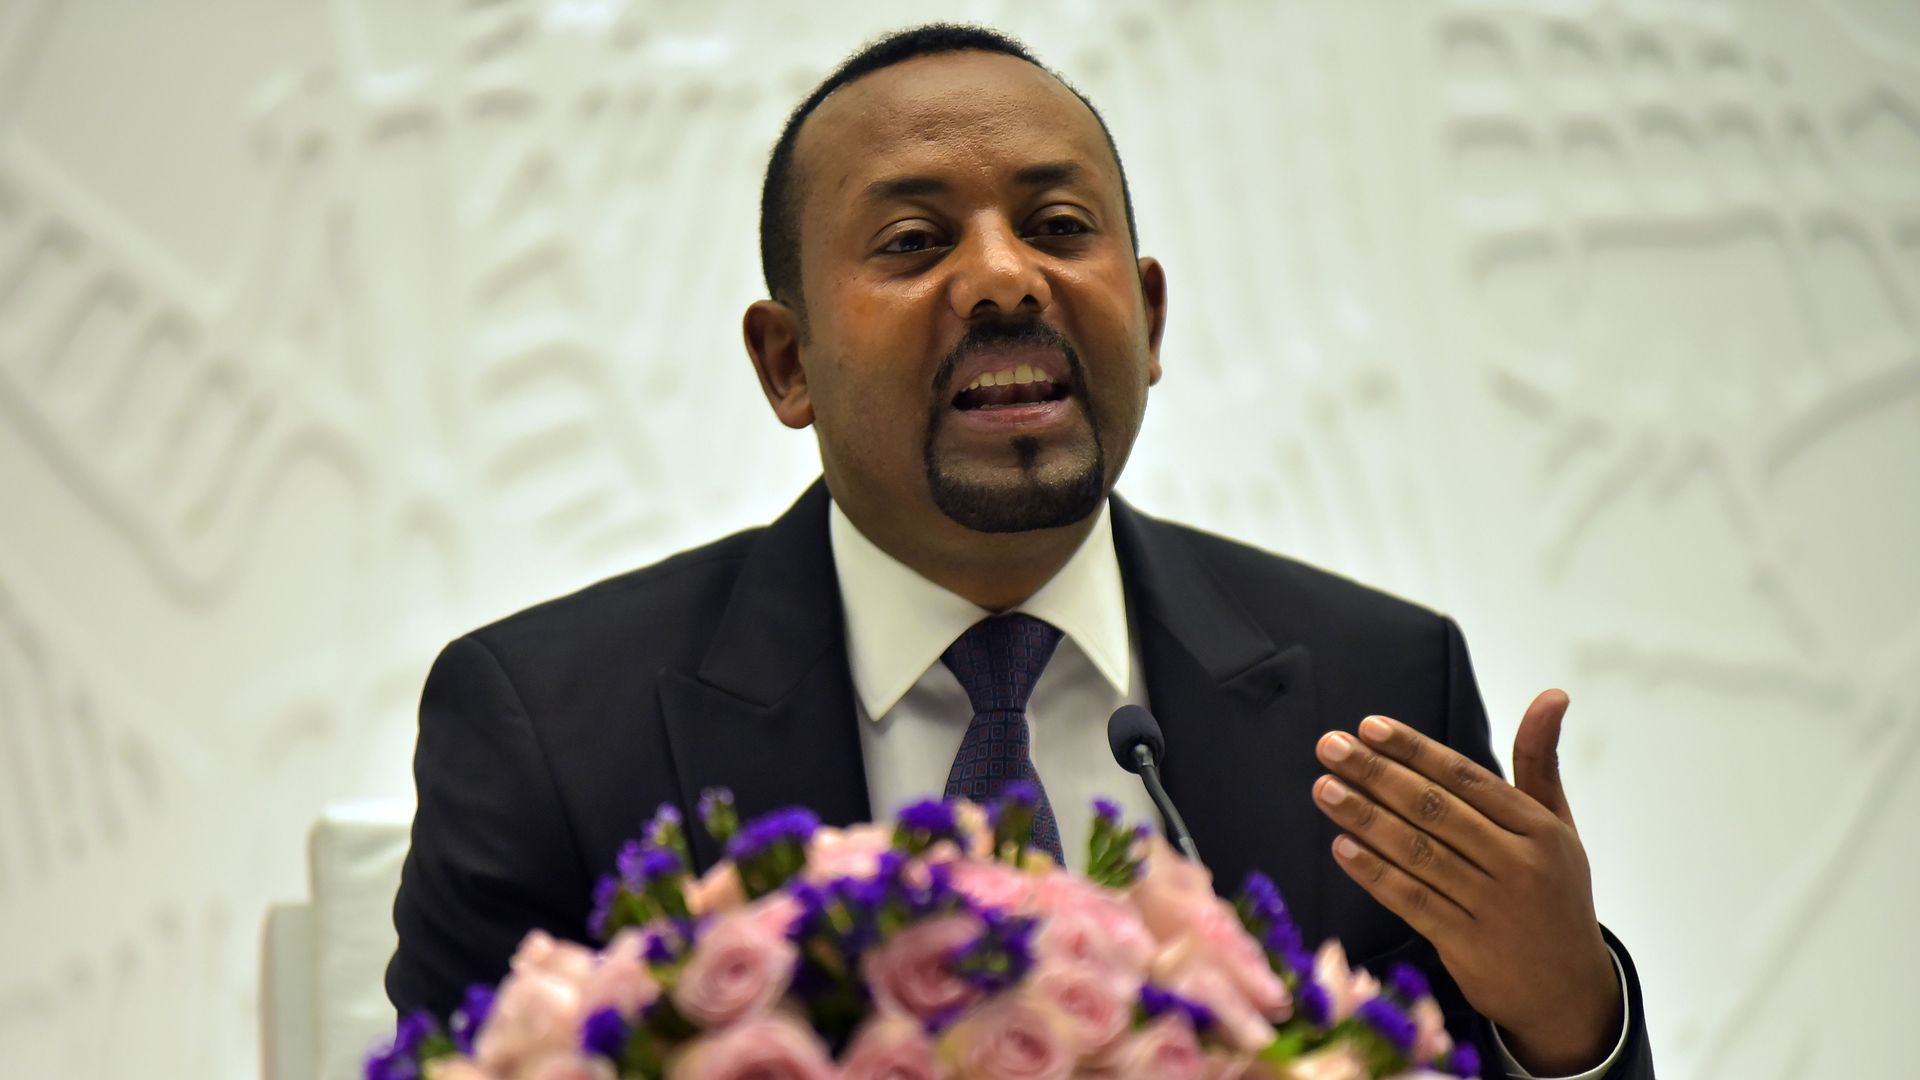 Ethiopia's Prime Minister Abiy Ahmed gives a press conference on August 1, 2019 